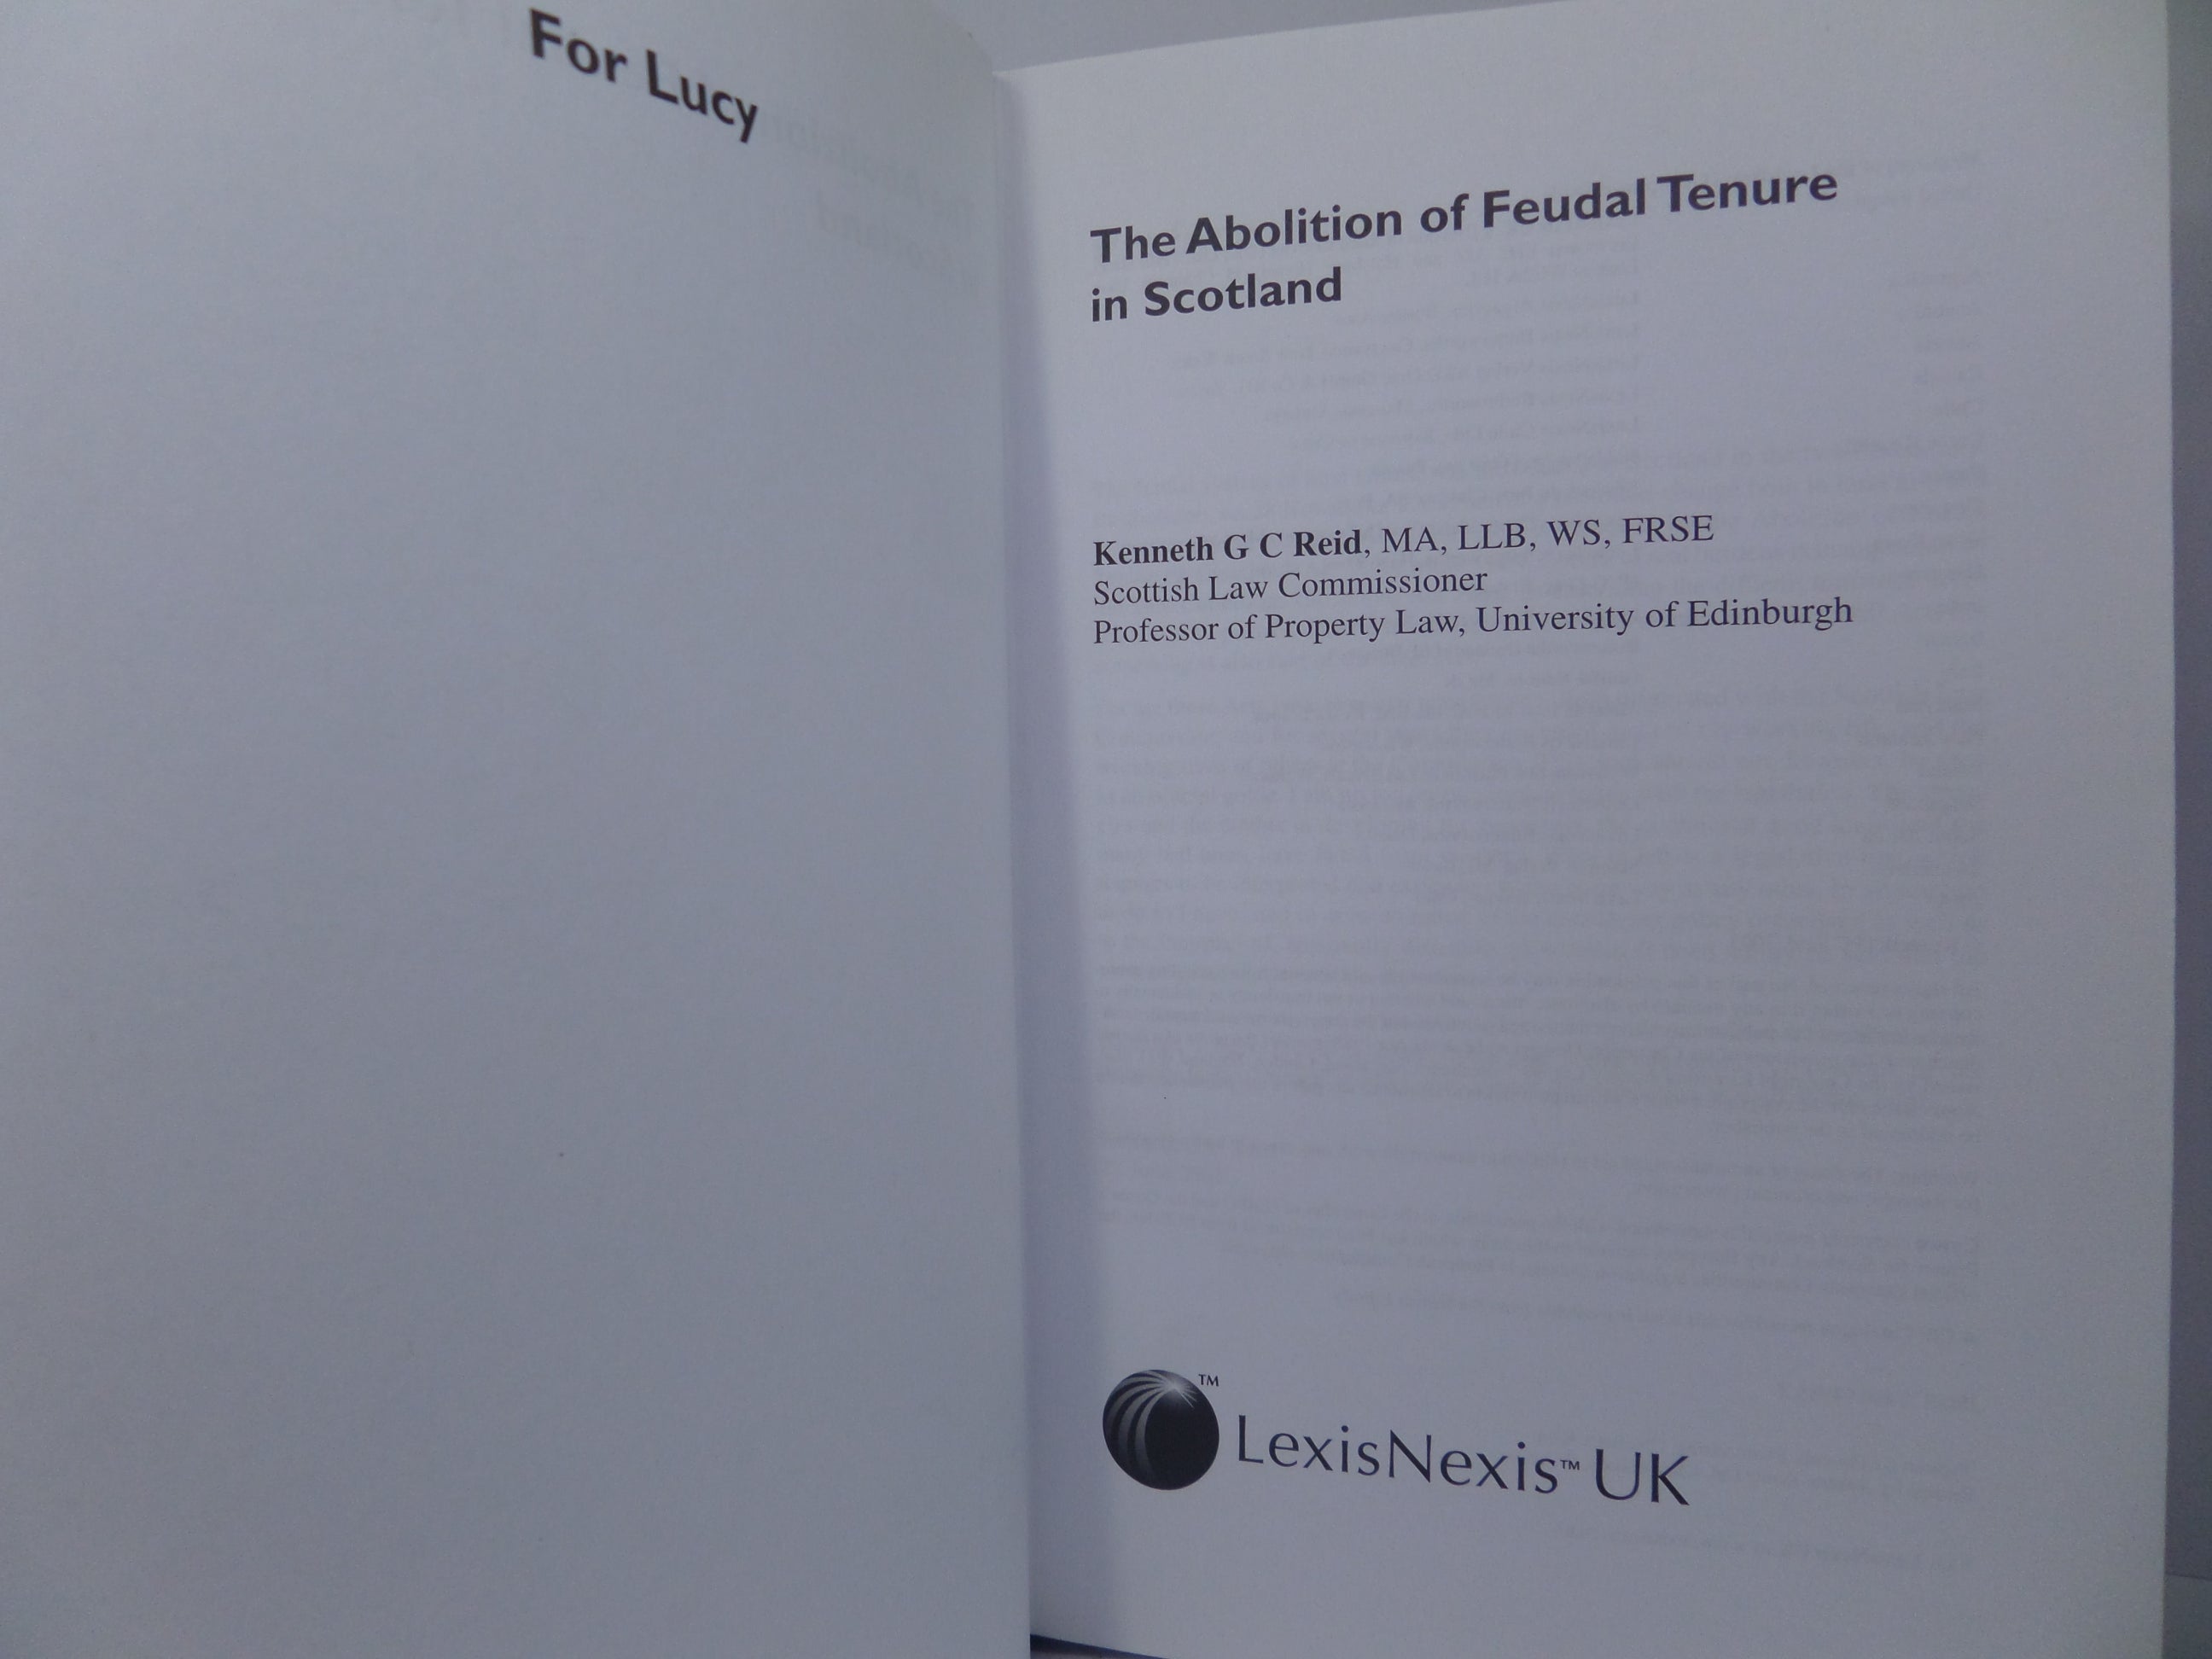 THE ABOLITION OF FEUDAL TENURE IN SCOTLAND BY KENNETH REID 2003 HARDCOVER